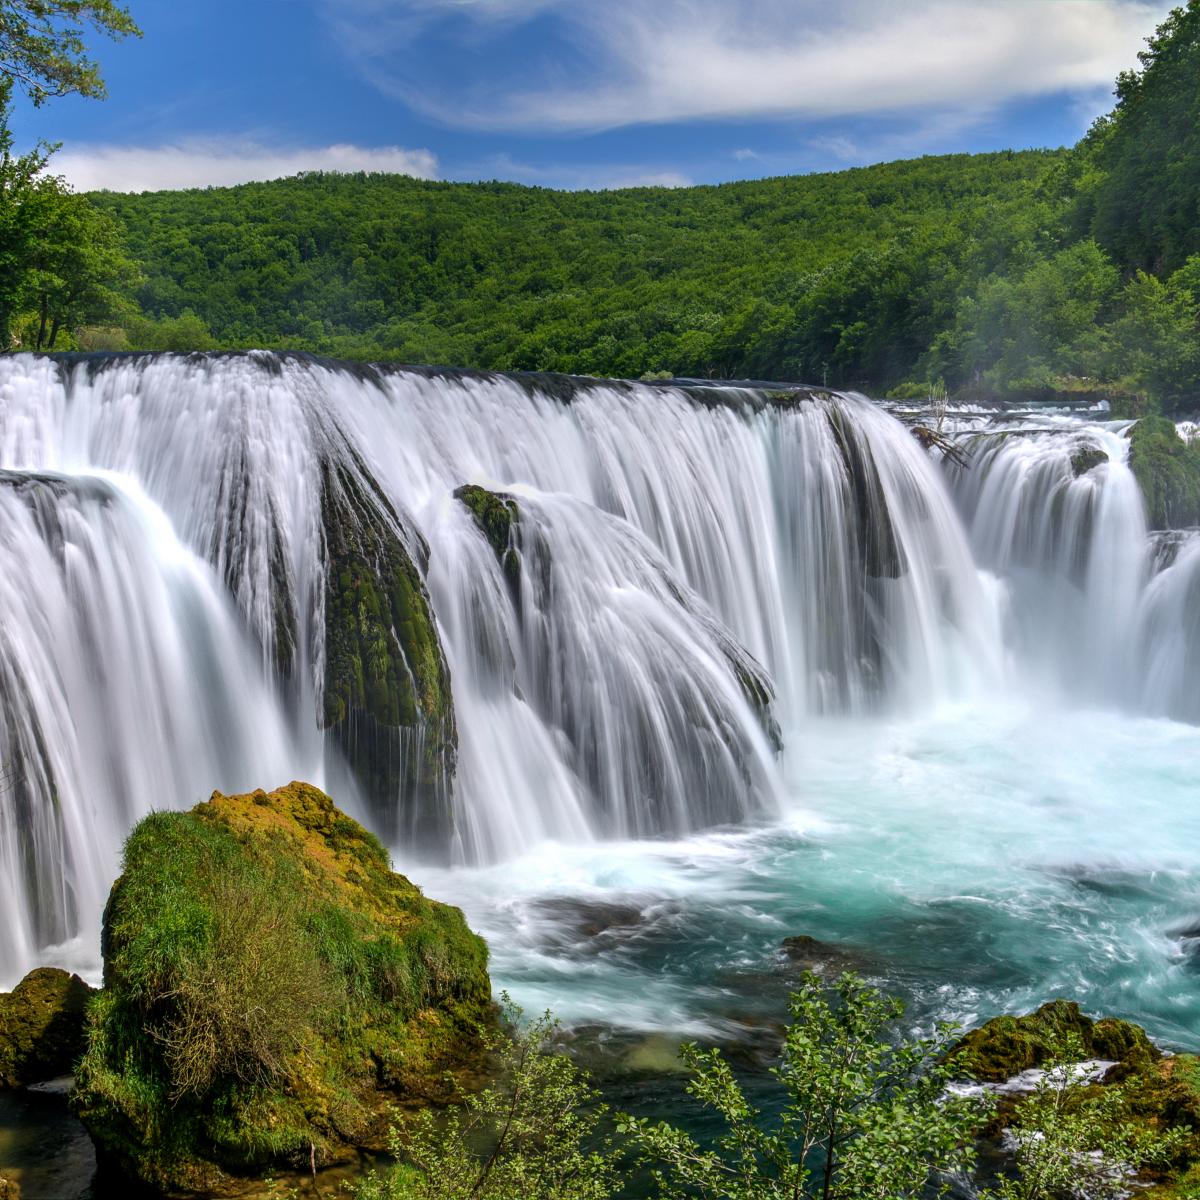 Scenic photo of the waterfall known as Milancev buk